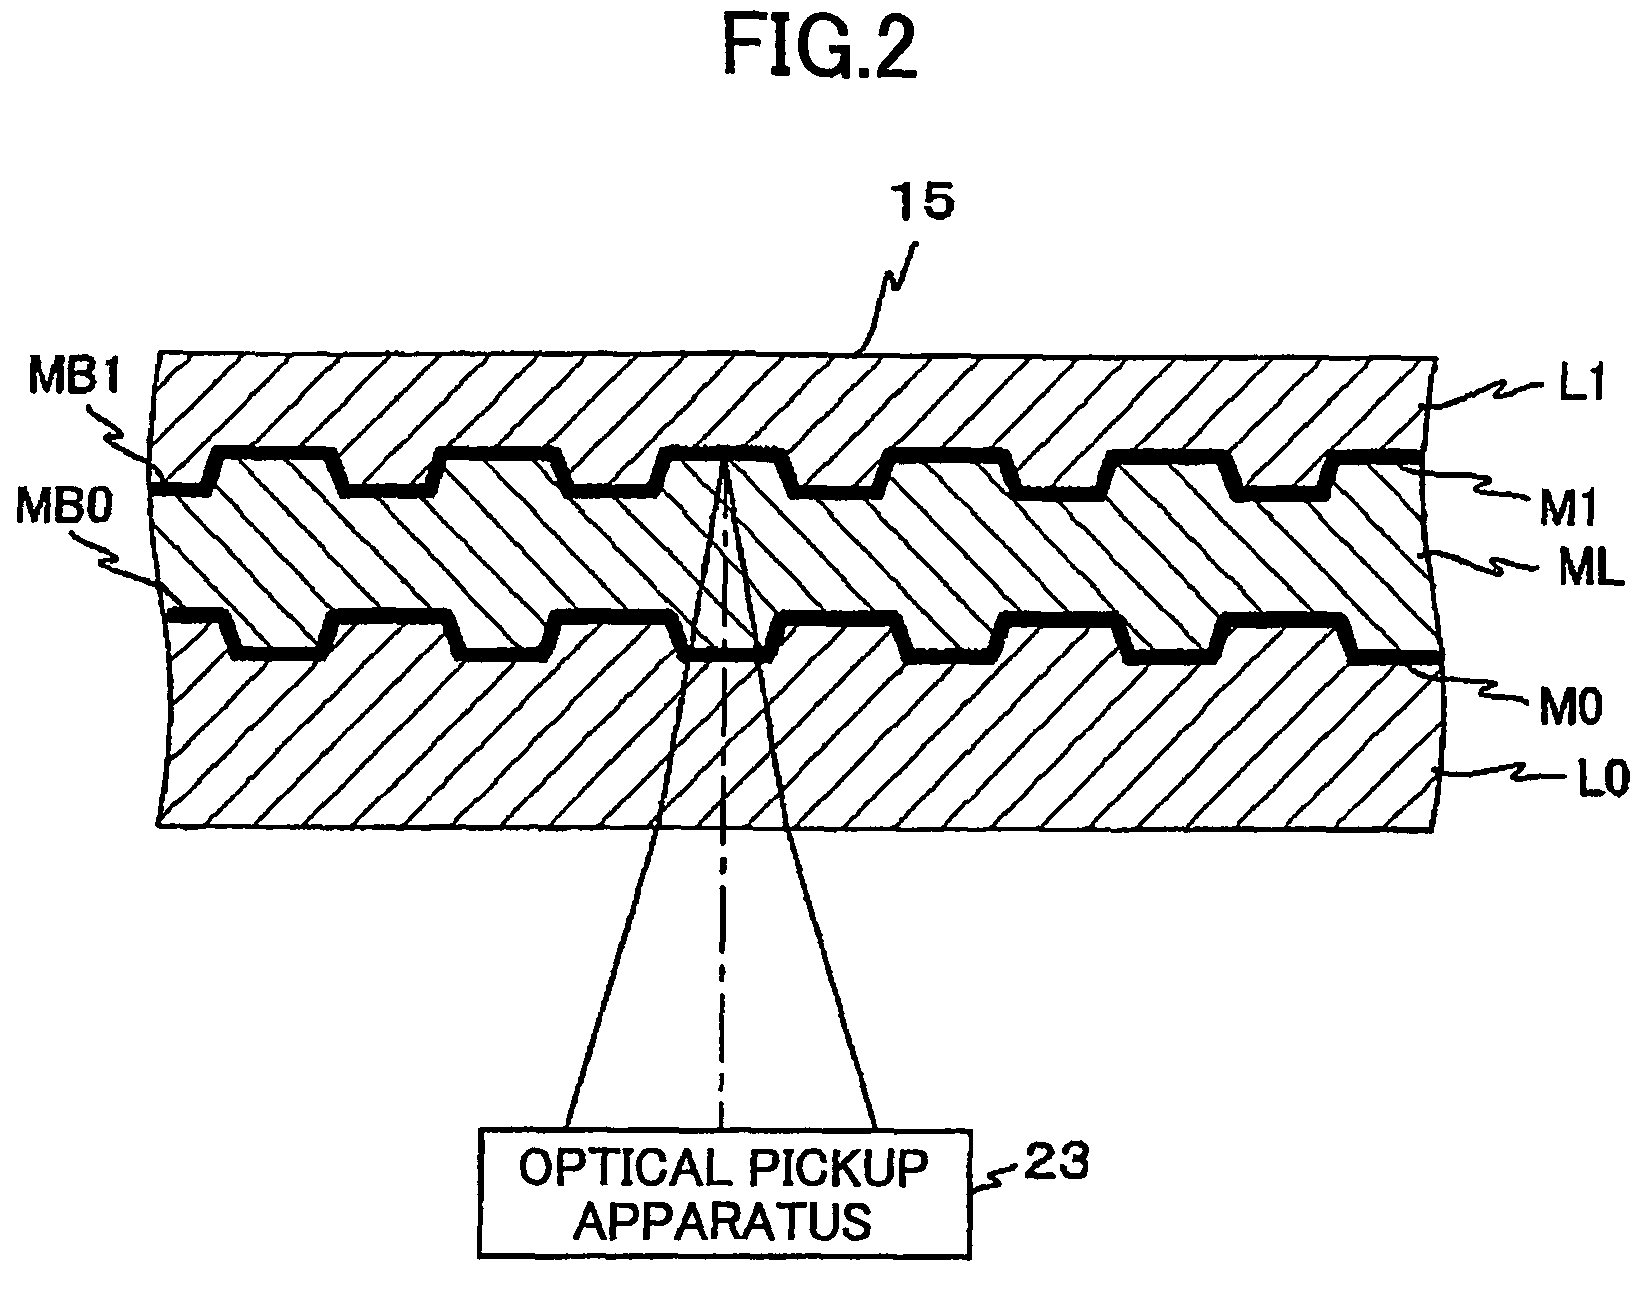 Apparatus for reproducing signal from multi-layered optical disk using multiple photo detectors